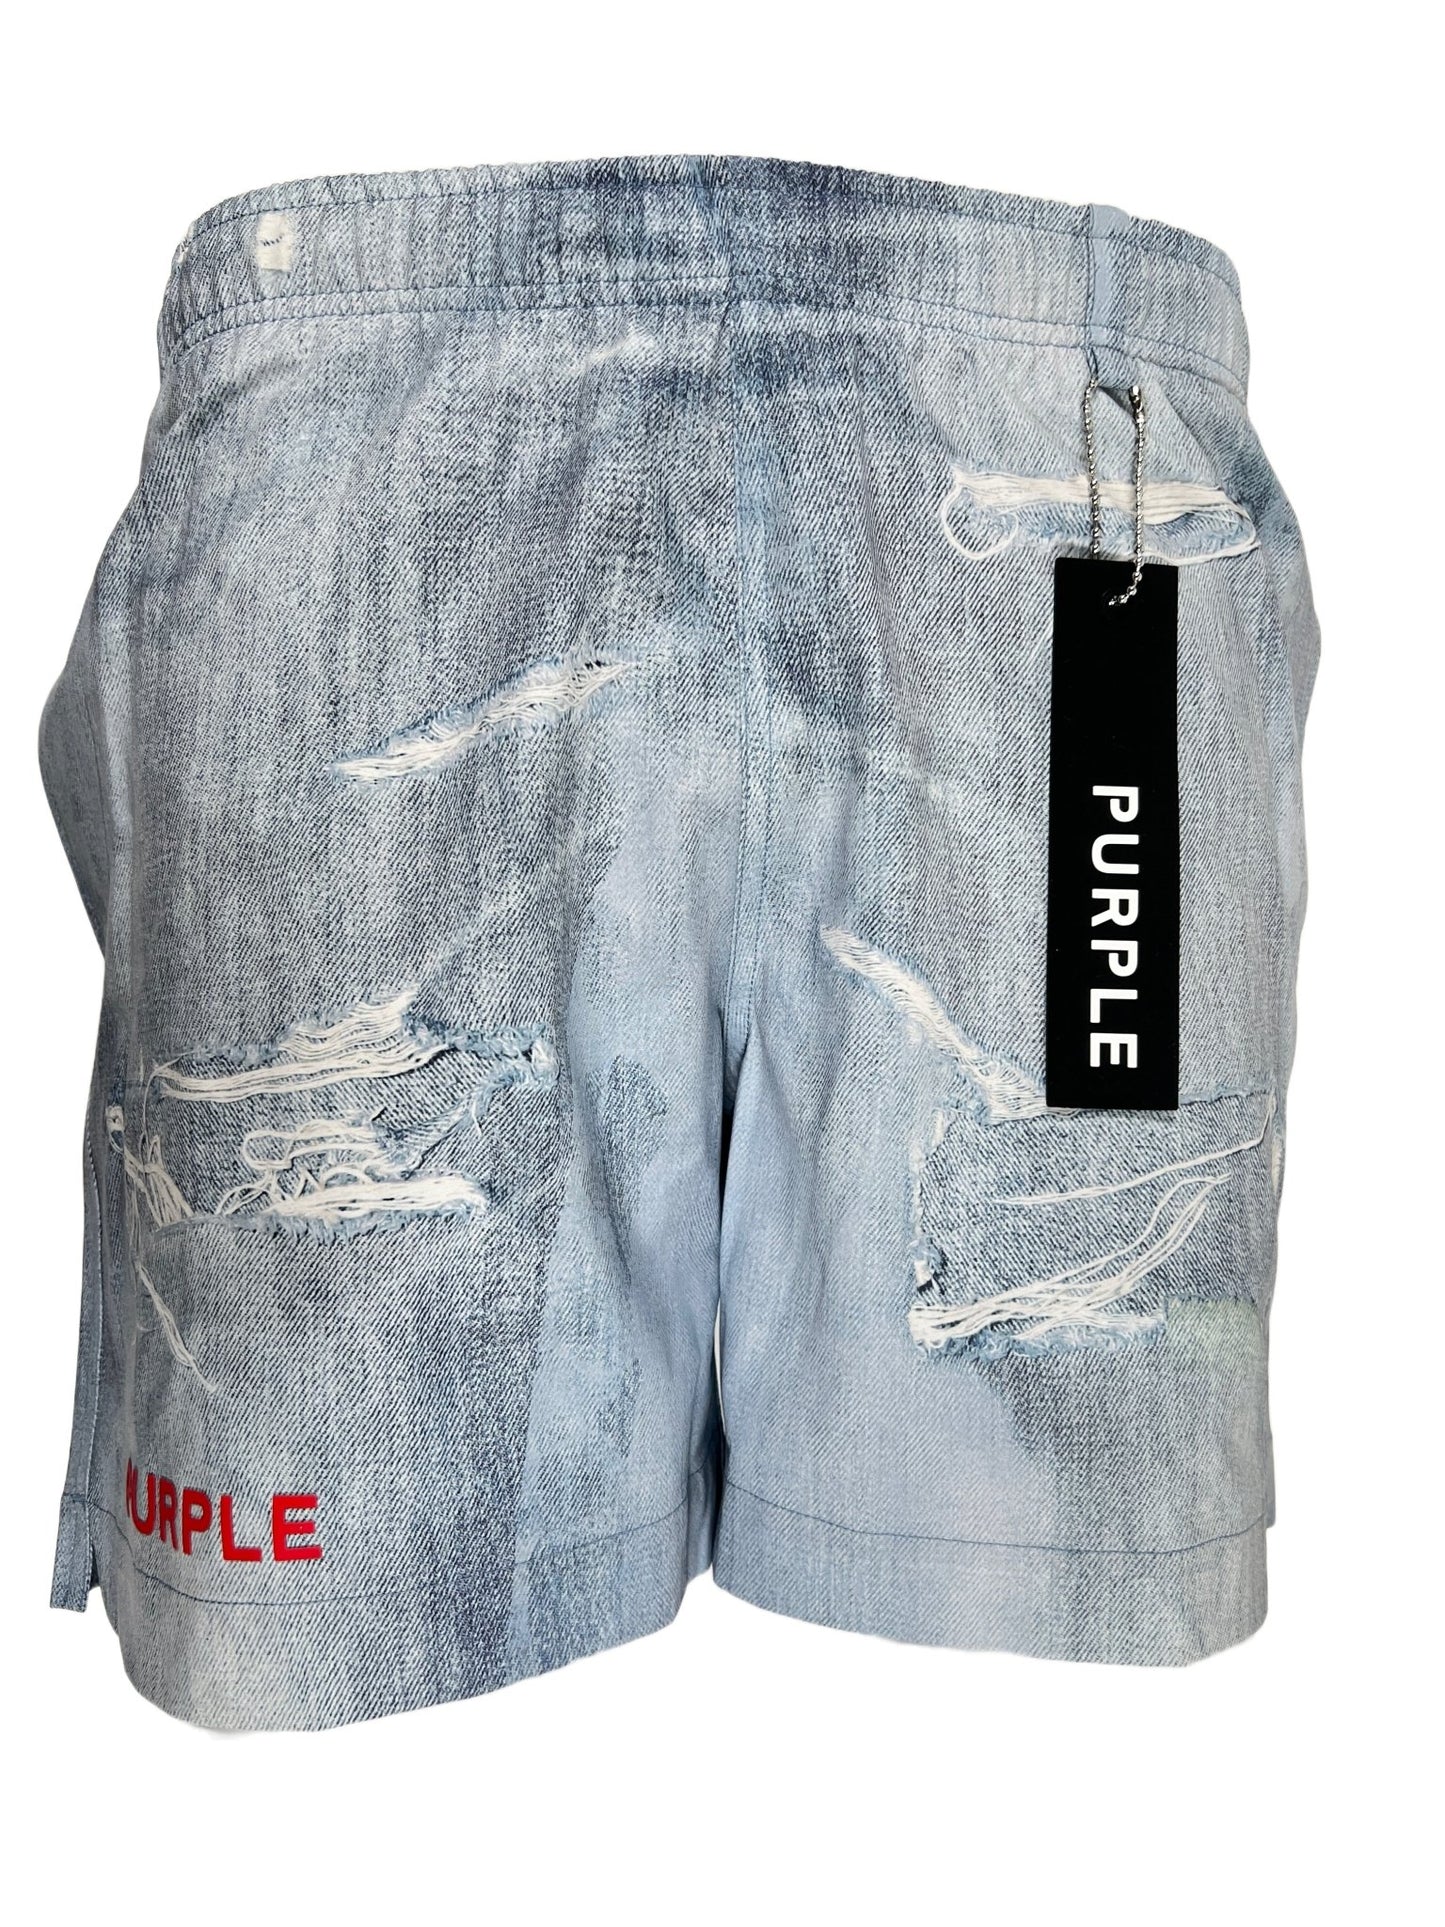 A pair of PURPLE BRAND P504-PIDD ALL ROUND SHORT WATER PRINT LT INDIGO denim shorts with a tag on them.